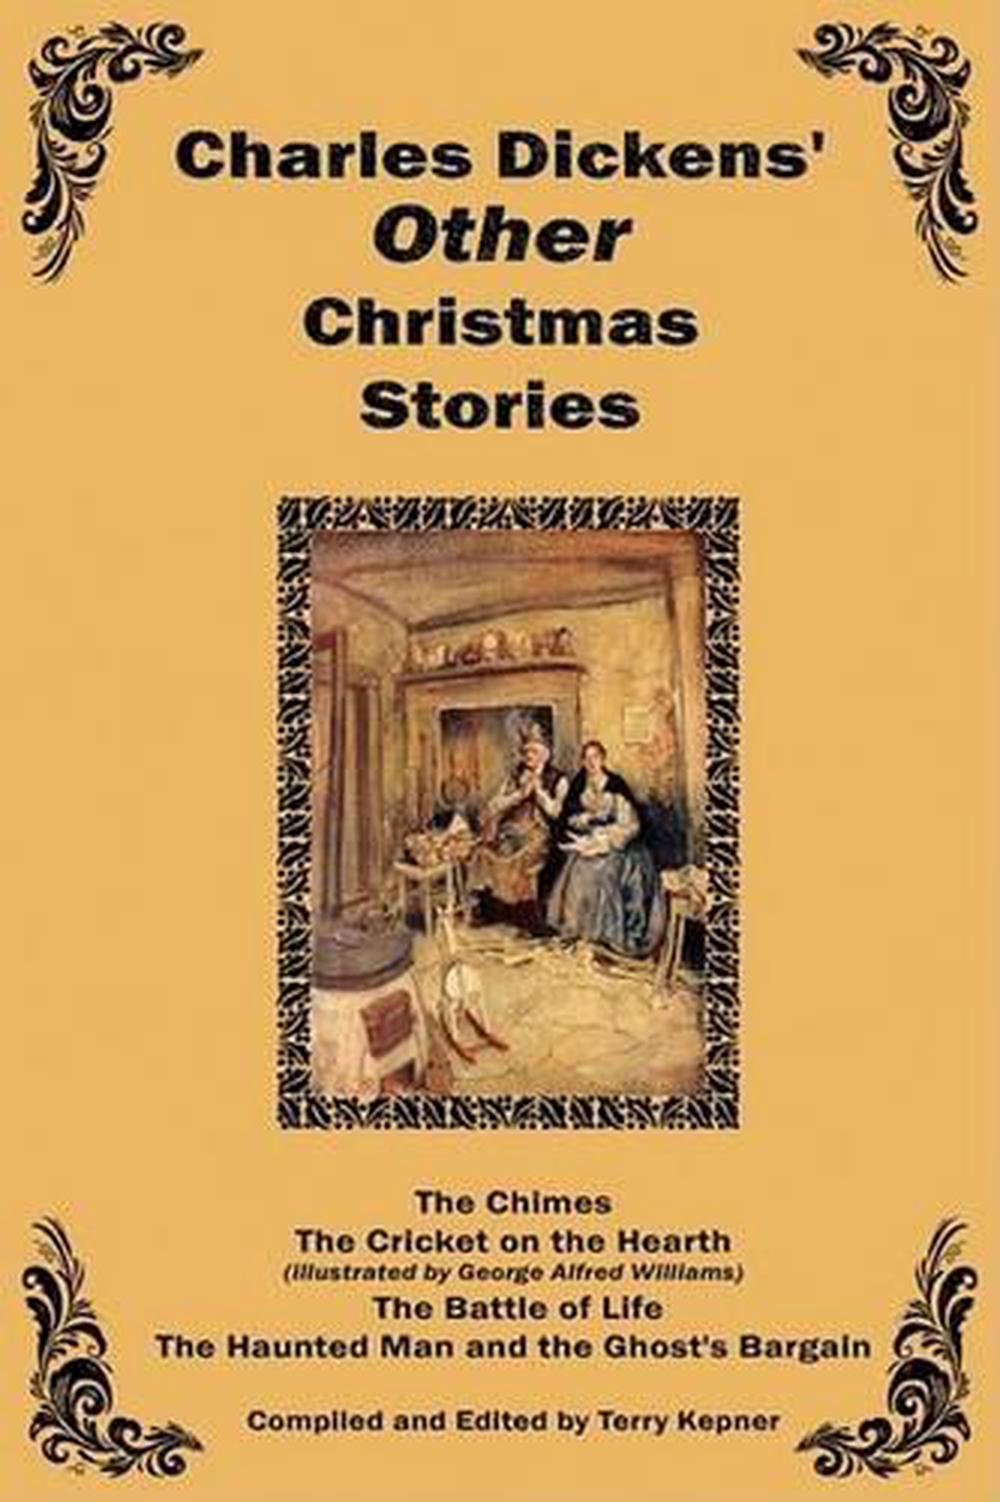 christmas stories by charles dickens